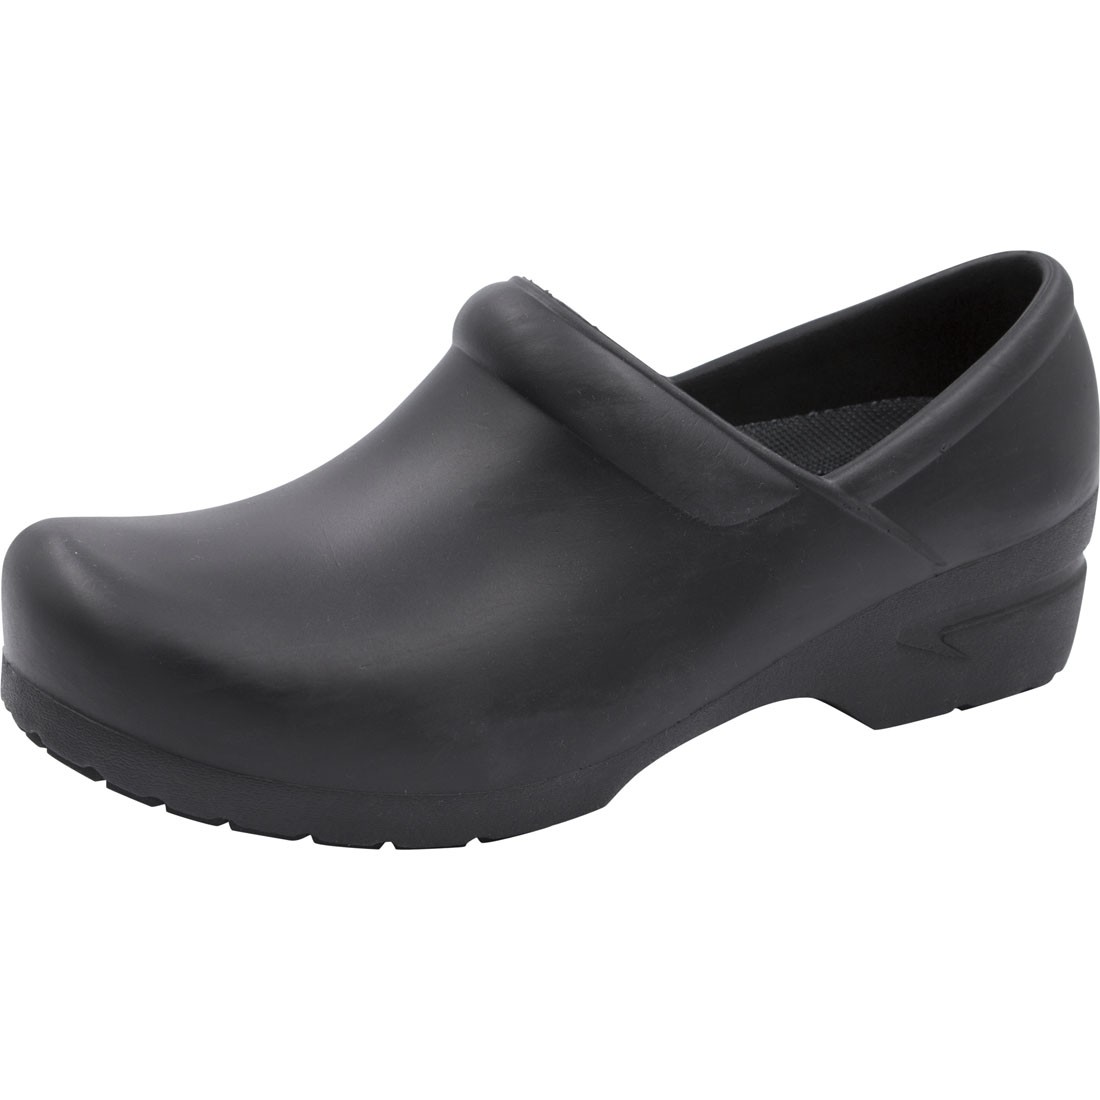 Picture of Anywear Guardianangel Blk 14 Guardianangel - protective Plastic Stepin, Black - Size 14